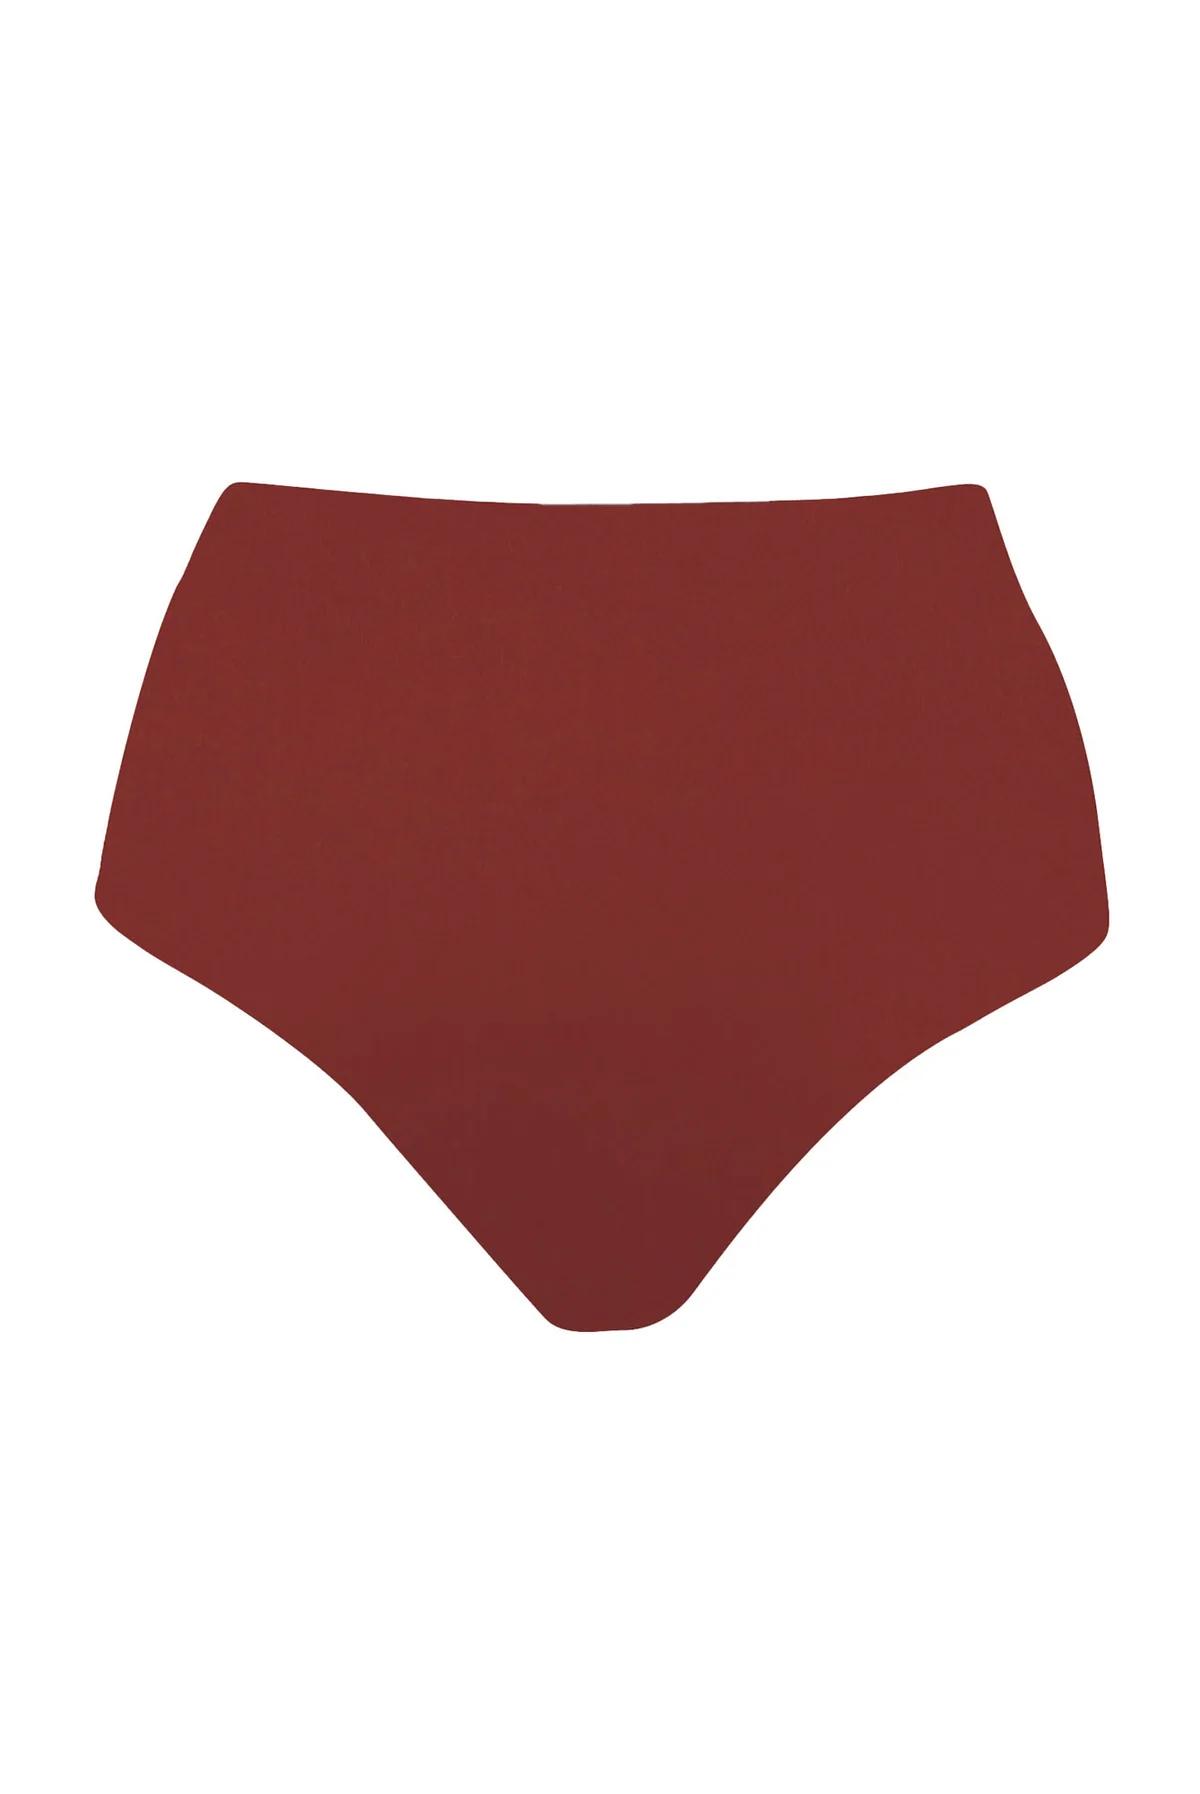 Product Image for High Waist Cheeky Bottom, Umber